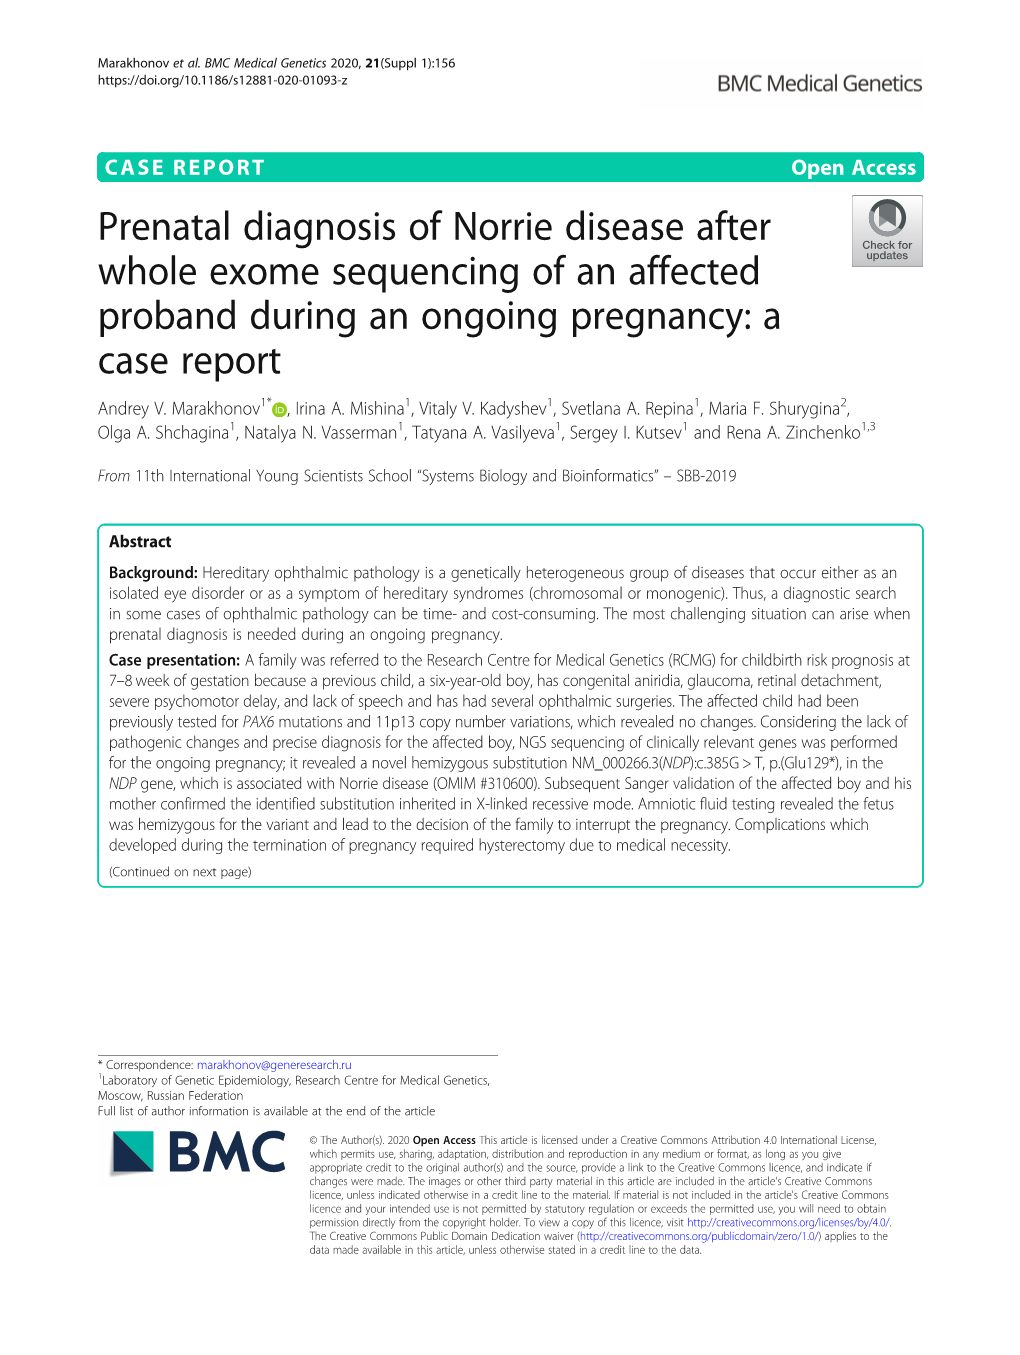 Prenatal Diagnosis of Norrie Disease After Whole Exome Sequencing of an Affected Proband During an Ongoing Pregnancy: a Case Report Andrey V